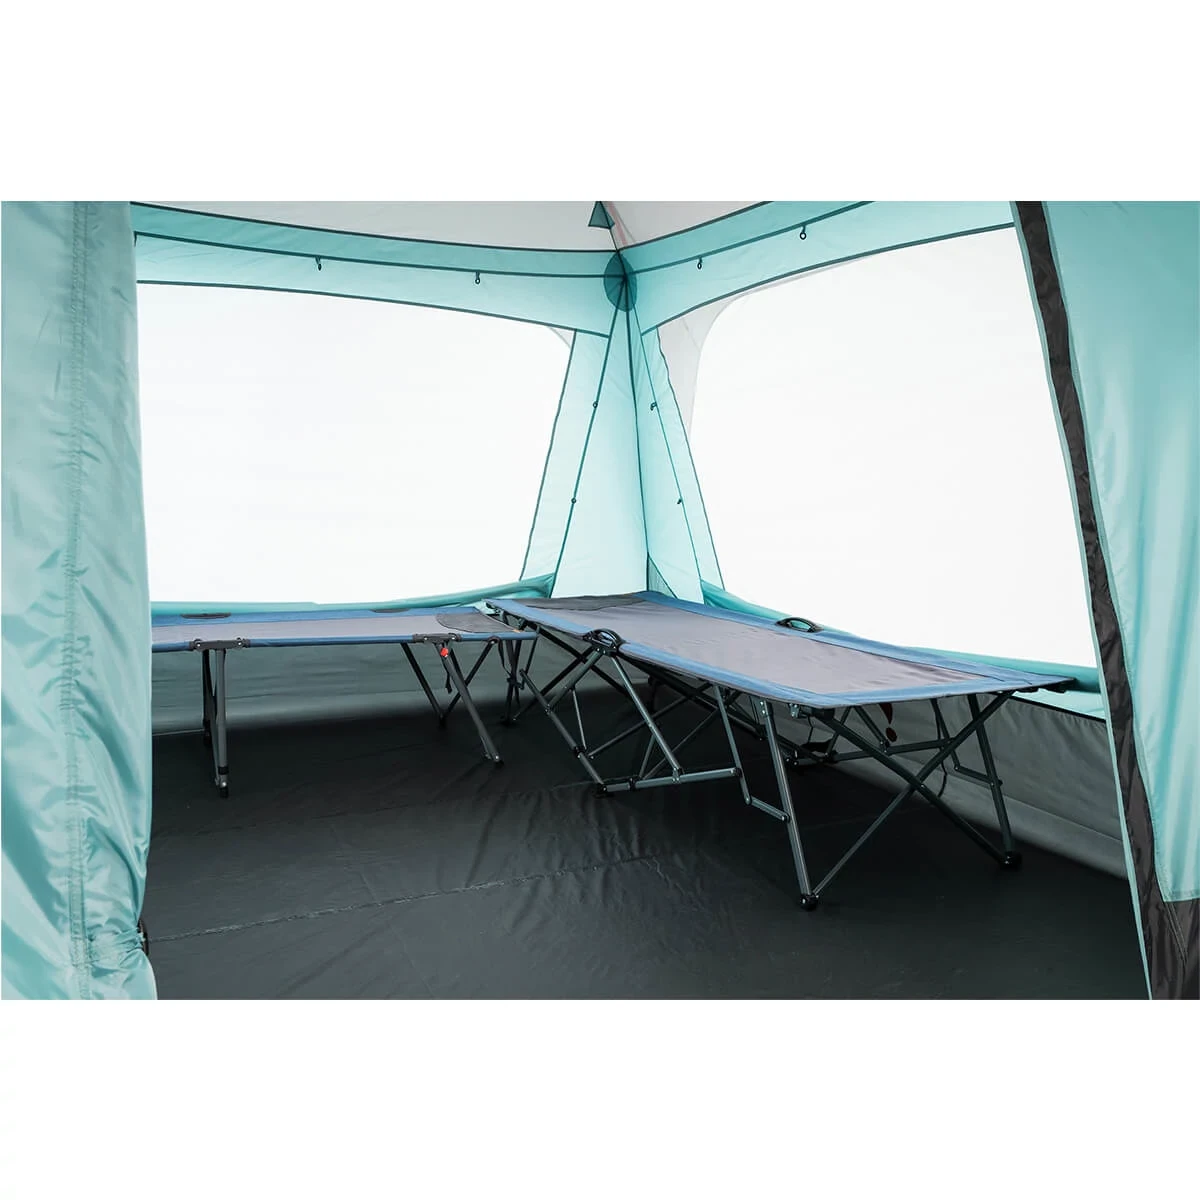 Jade Canyon X6 tent interior with cots set up